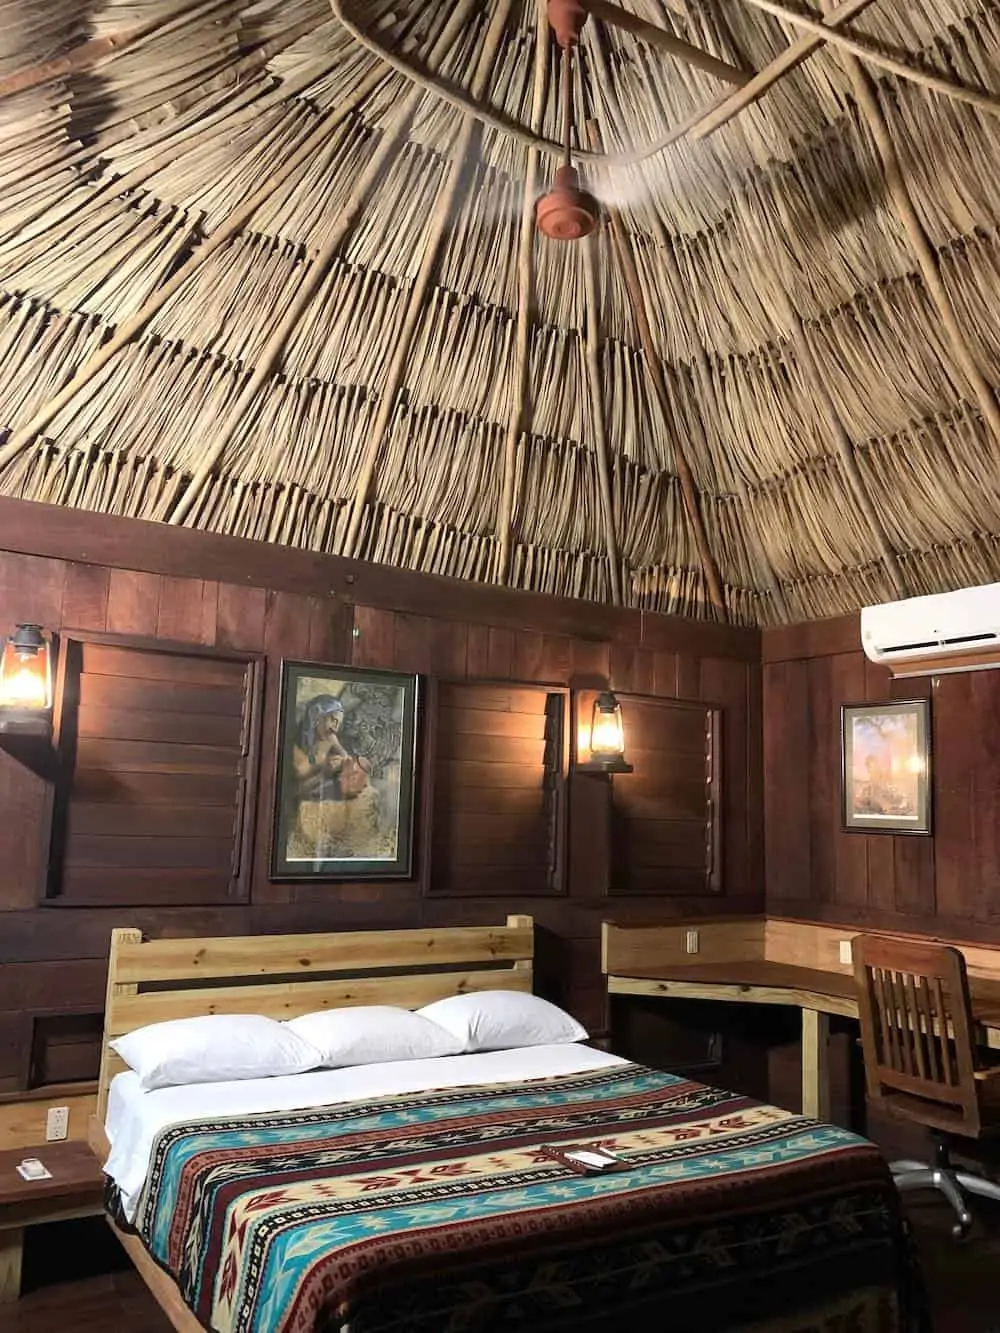 Interior of a thatched roof cabana at Lamanai Outpost Lodge in Belize..